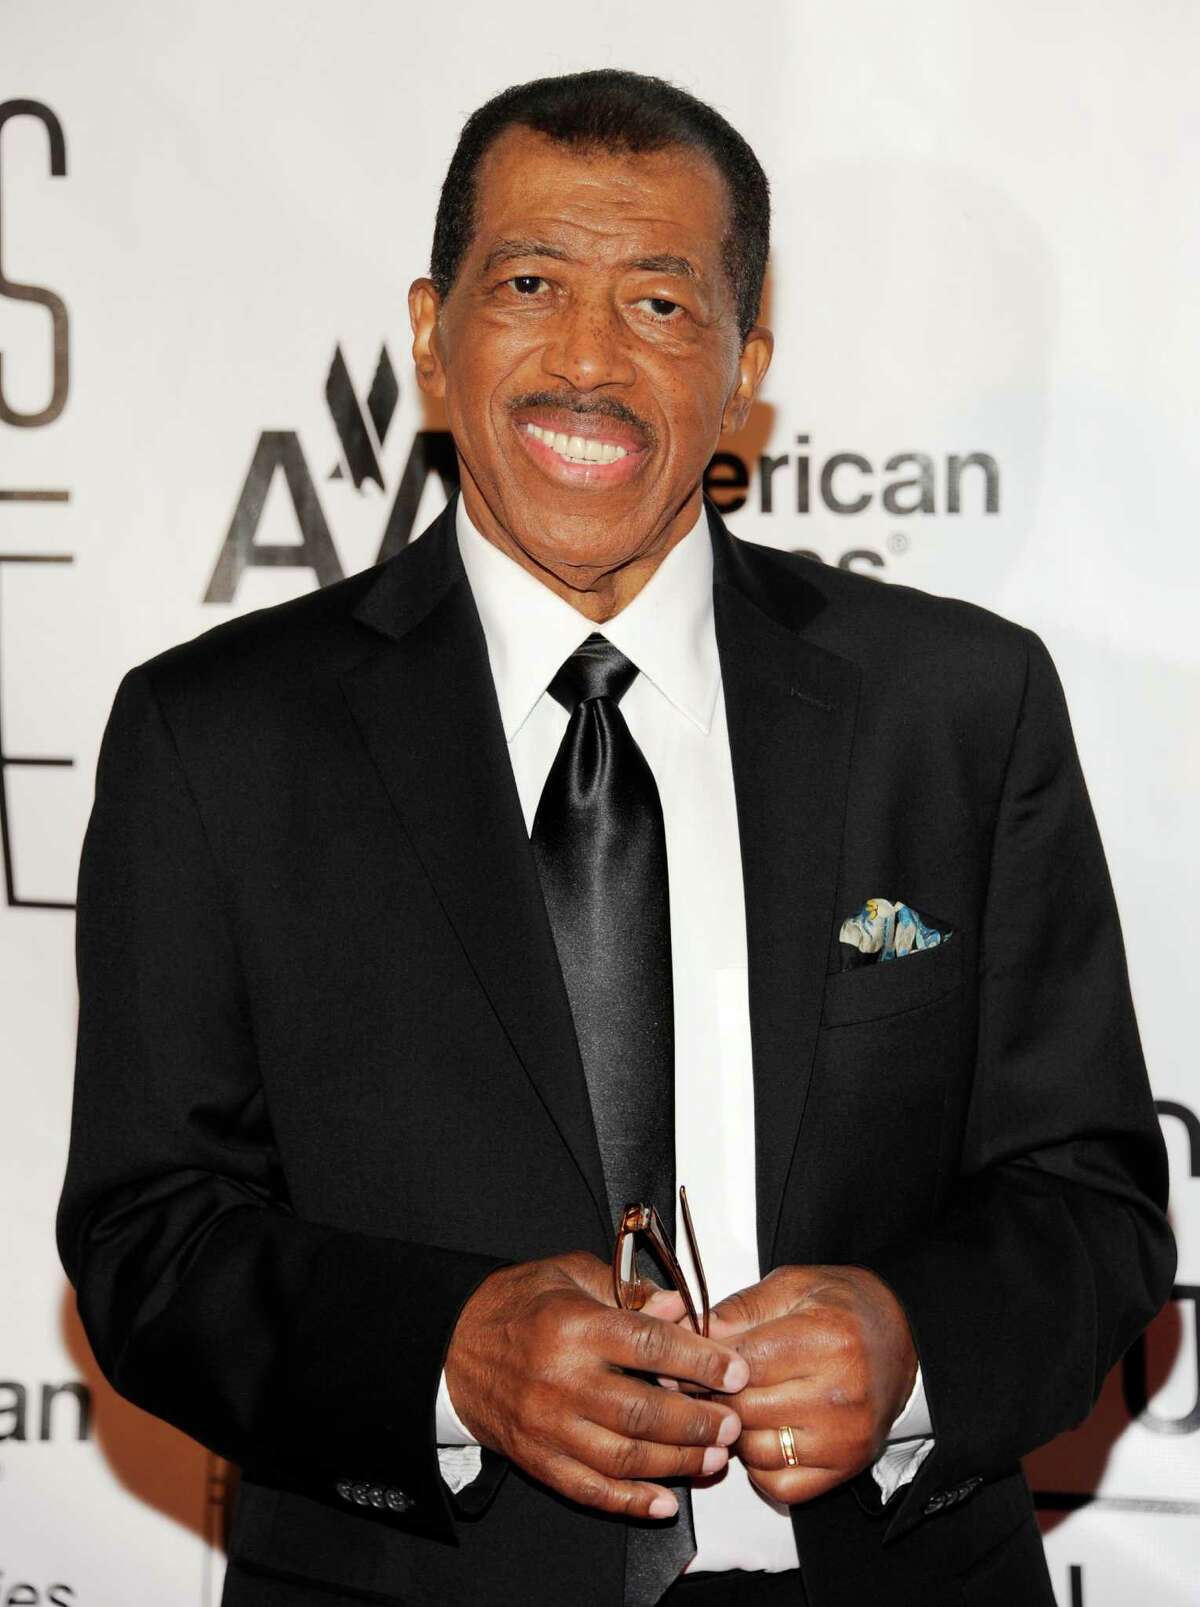 FILE - In this June 14, 2012, file photo, Towering Performance Award inductee Ben E. King arrives at the 2012 Songwriters Hall of Fame induction and awards gala in New York. King, singer of such classics as "Stand By Me," "There Goes My Baby" and "Spanish Harlem," died Thursday, April 30, 2015, publicist Phil Brown told The Associated Press. He was 76. (Photo by Evan Agostini/Invision, File)